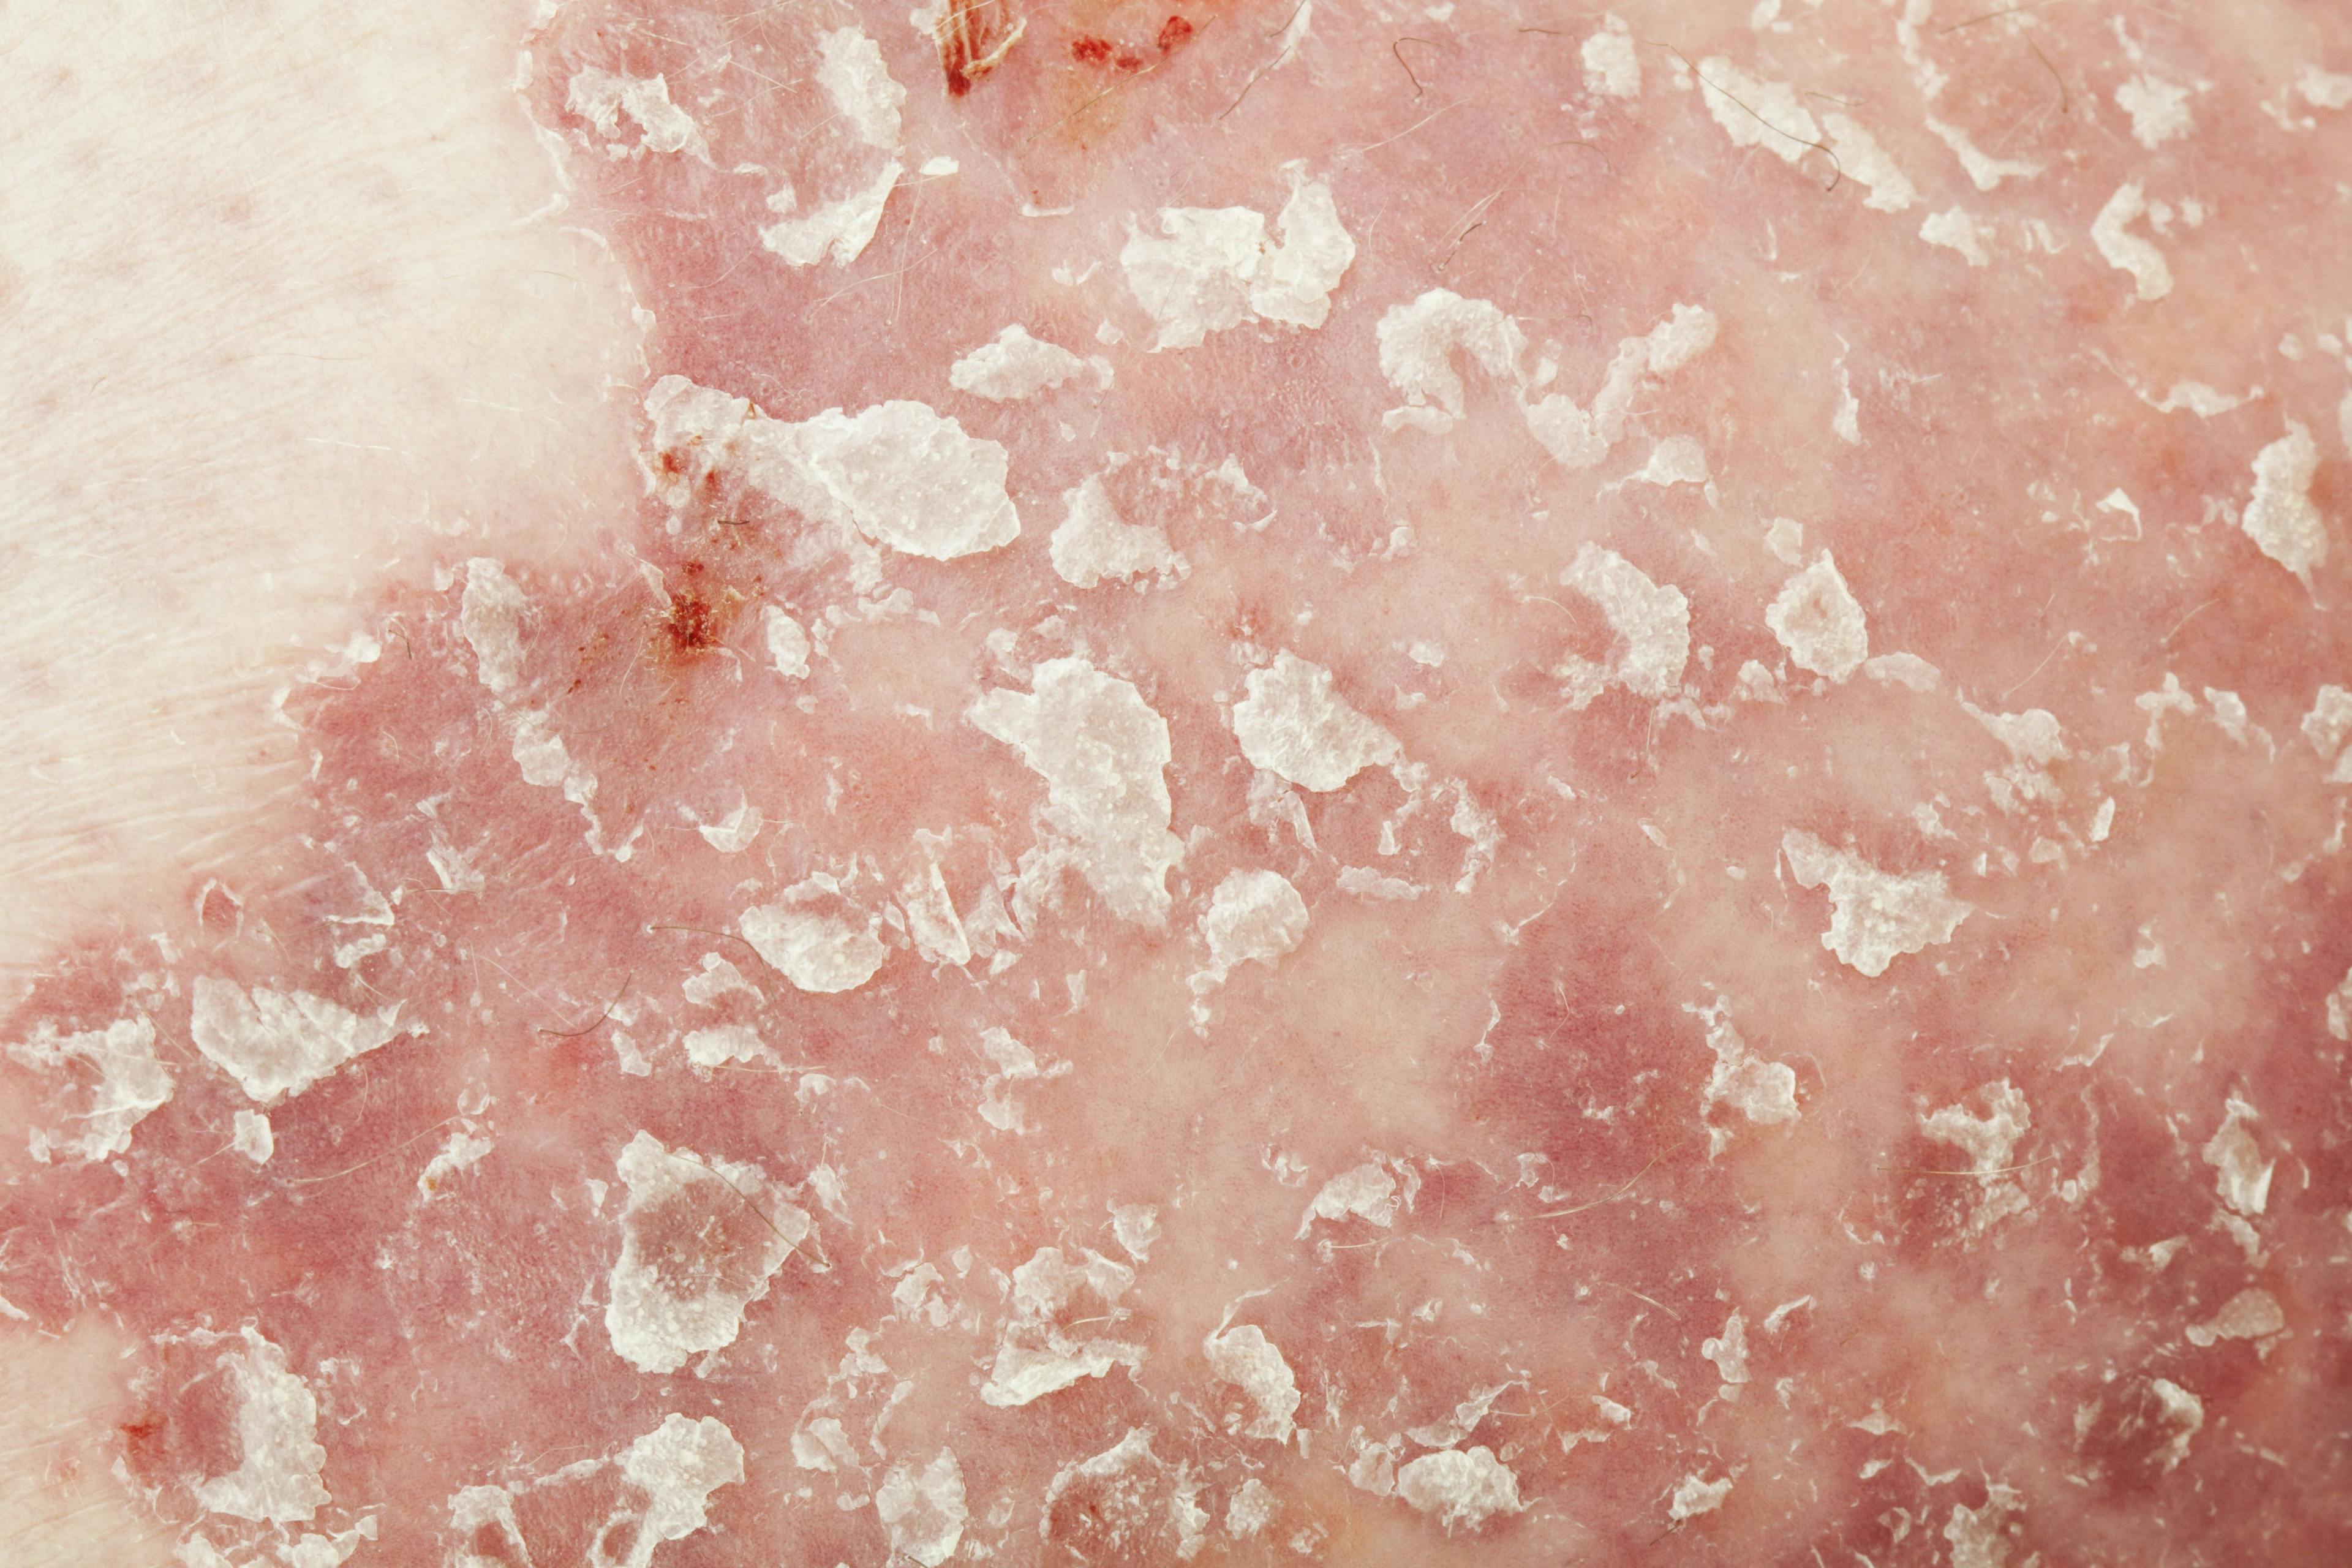 Study: Overlapping Comorbidity Risks Found in Psoriasis and Palmoplantar Pustulosis